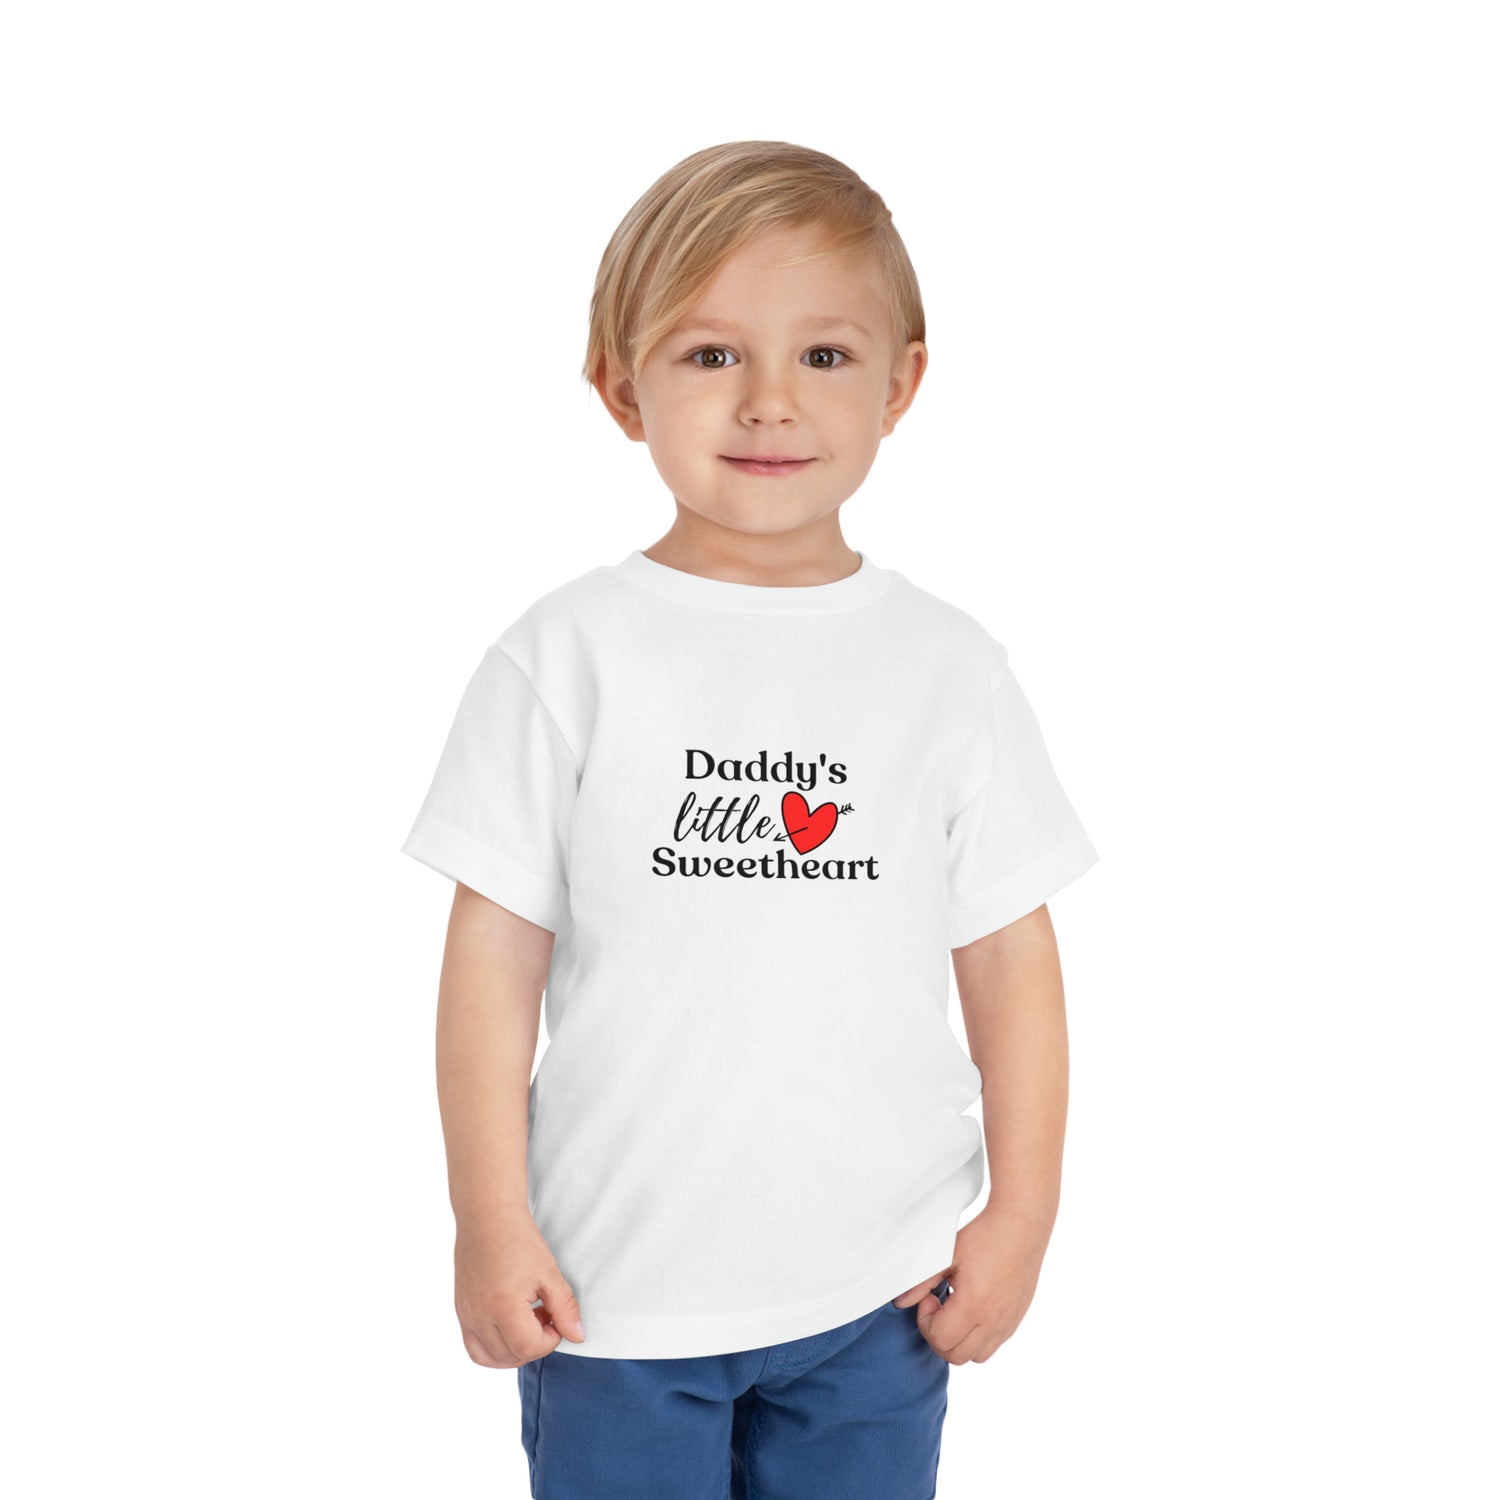 Daddy's Little Sweetheart Toddler Tee